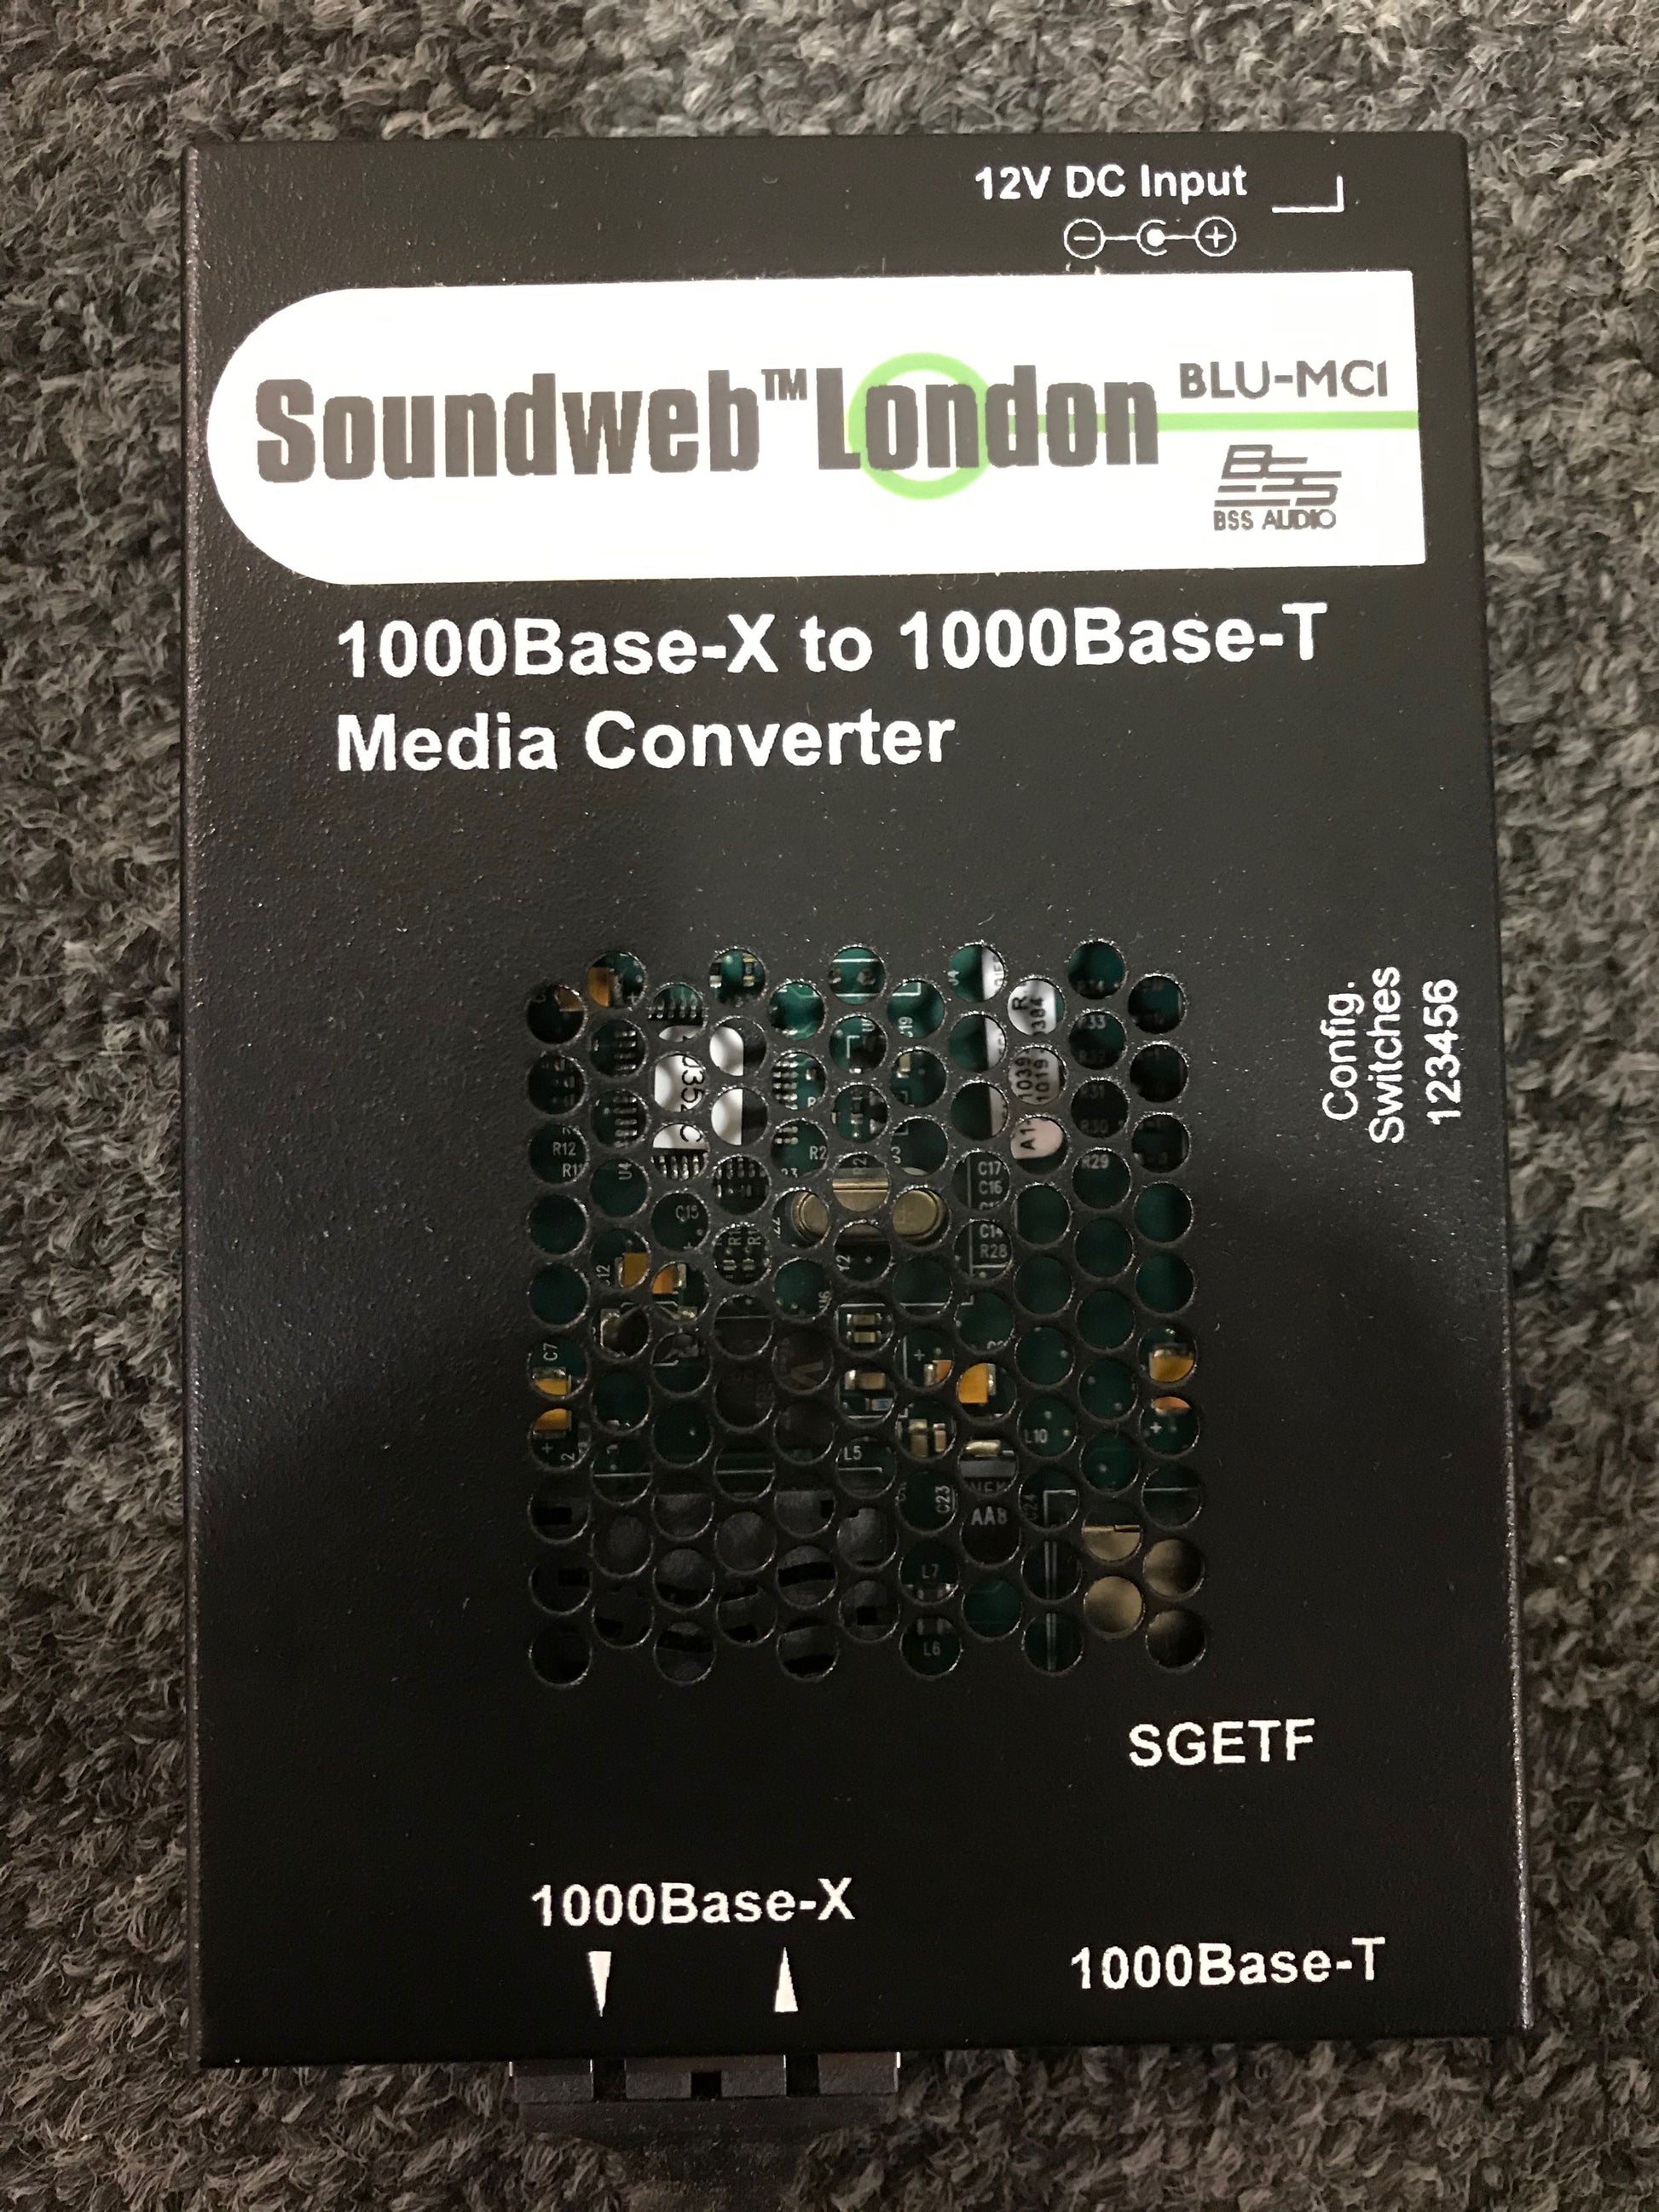 New BSS Audio MC1 Stand-Alone Media Converter for Sale, We Sell Professional Audio Equipment. Audio Systems, Amplifiers, Consoles, Mixers, Electronics, Entertainment, Sound, Live. 